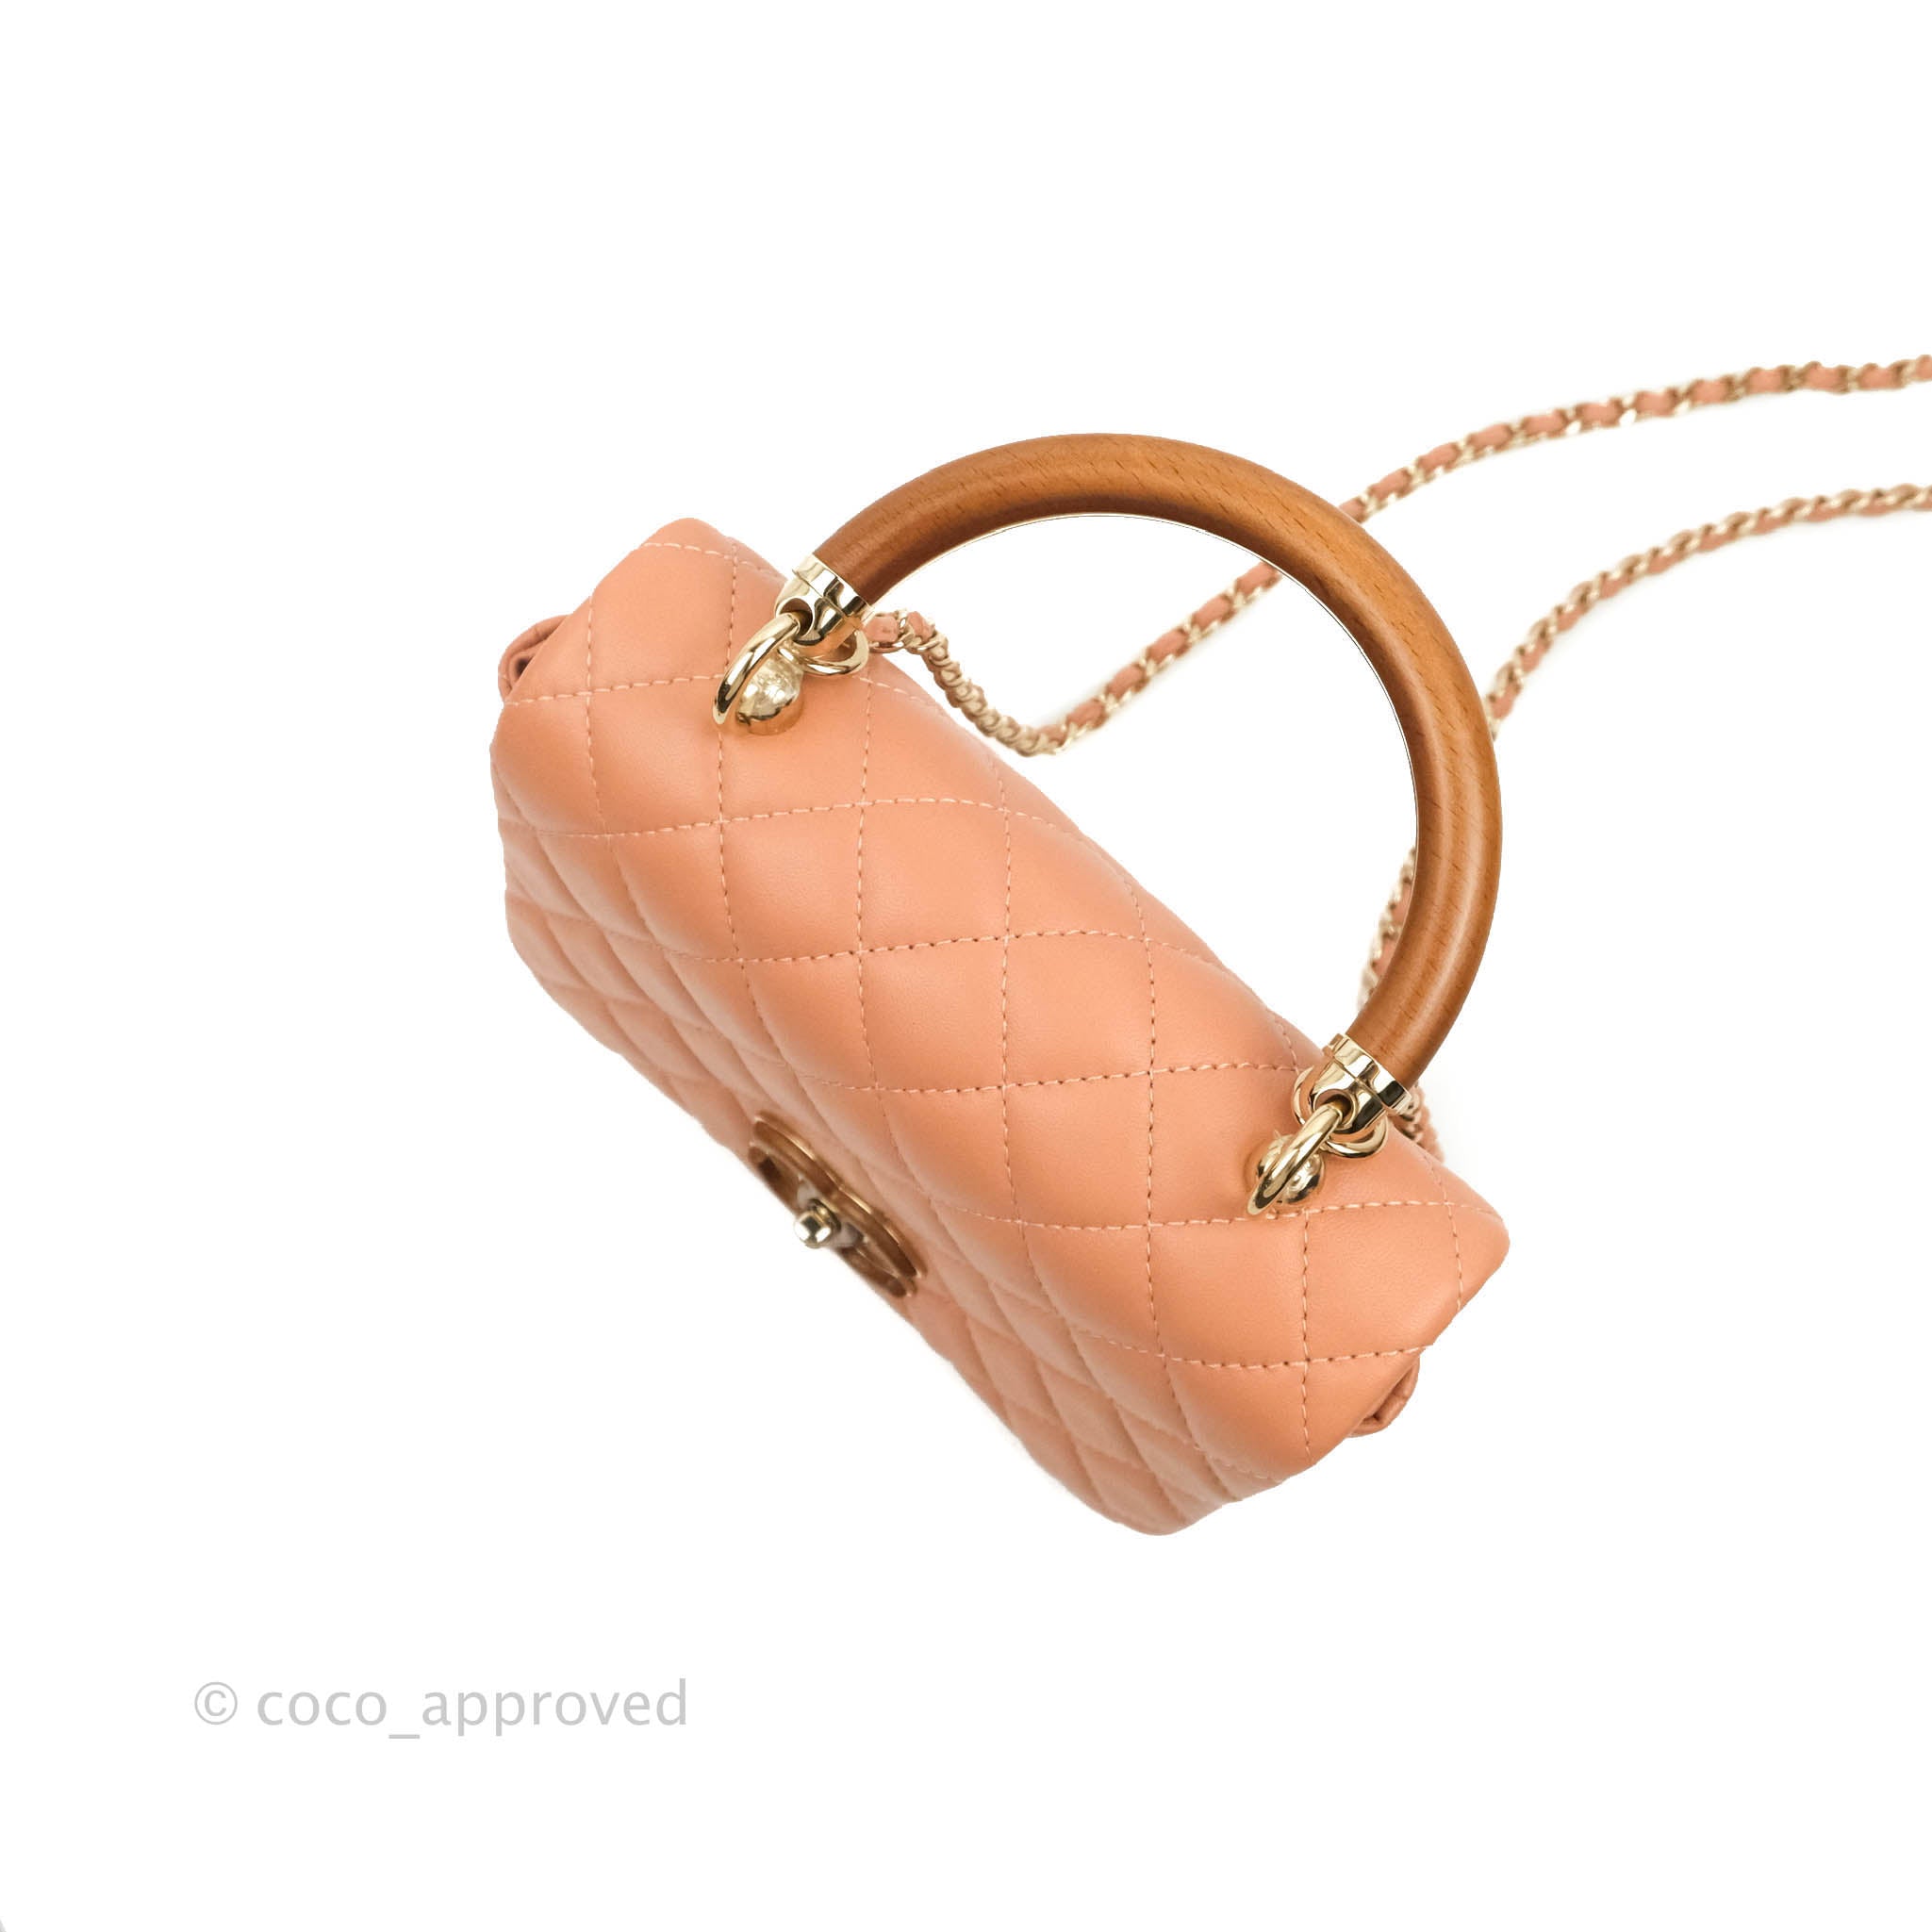 Chanel Quilted Knock On Wood Top Handle Bag Beige Pink Lambskin